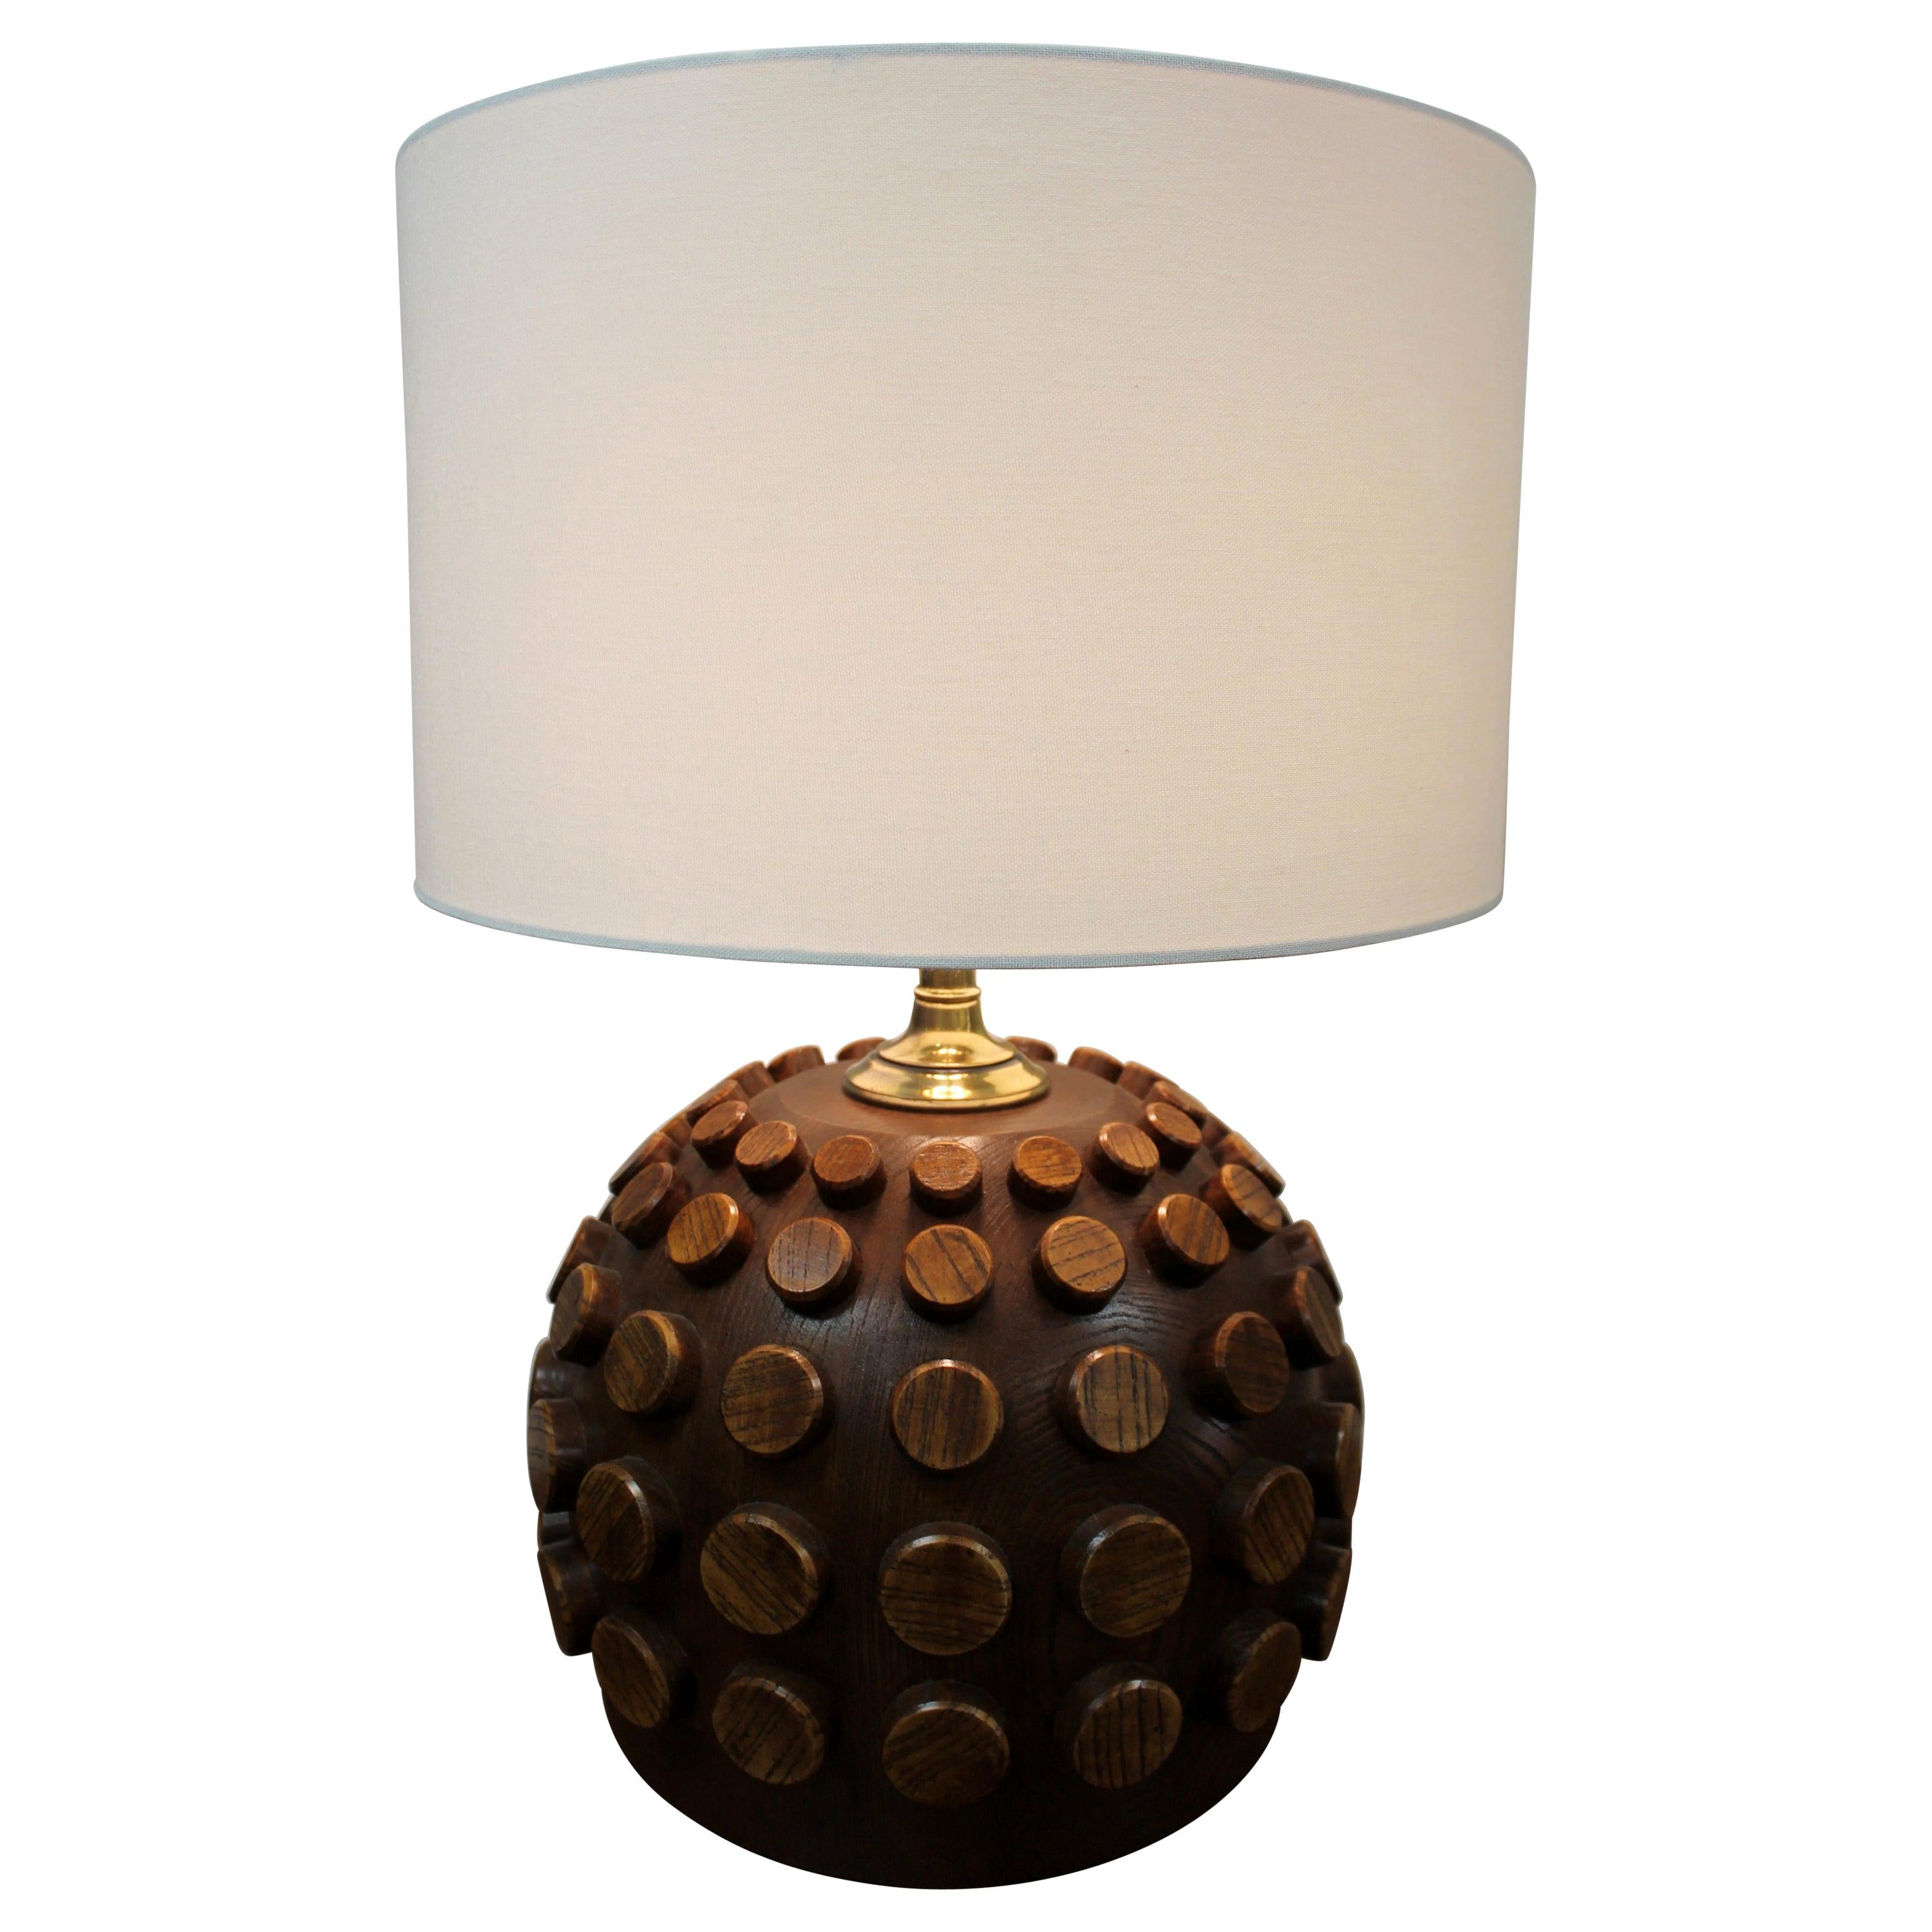 Modernist Table Lamp with Raised Discs